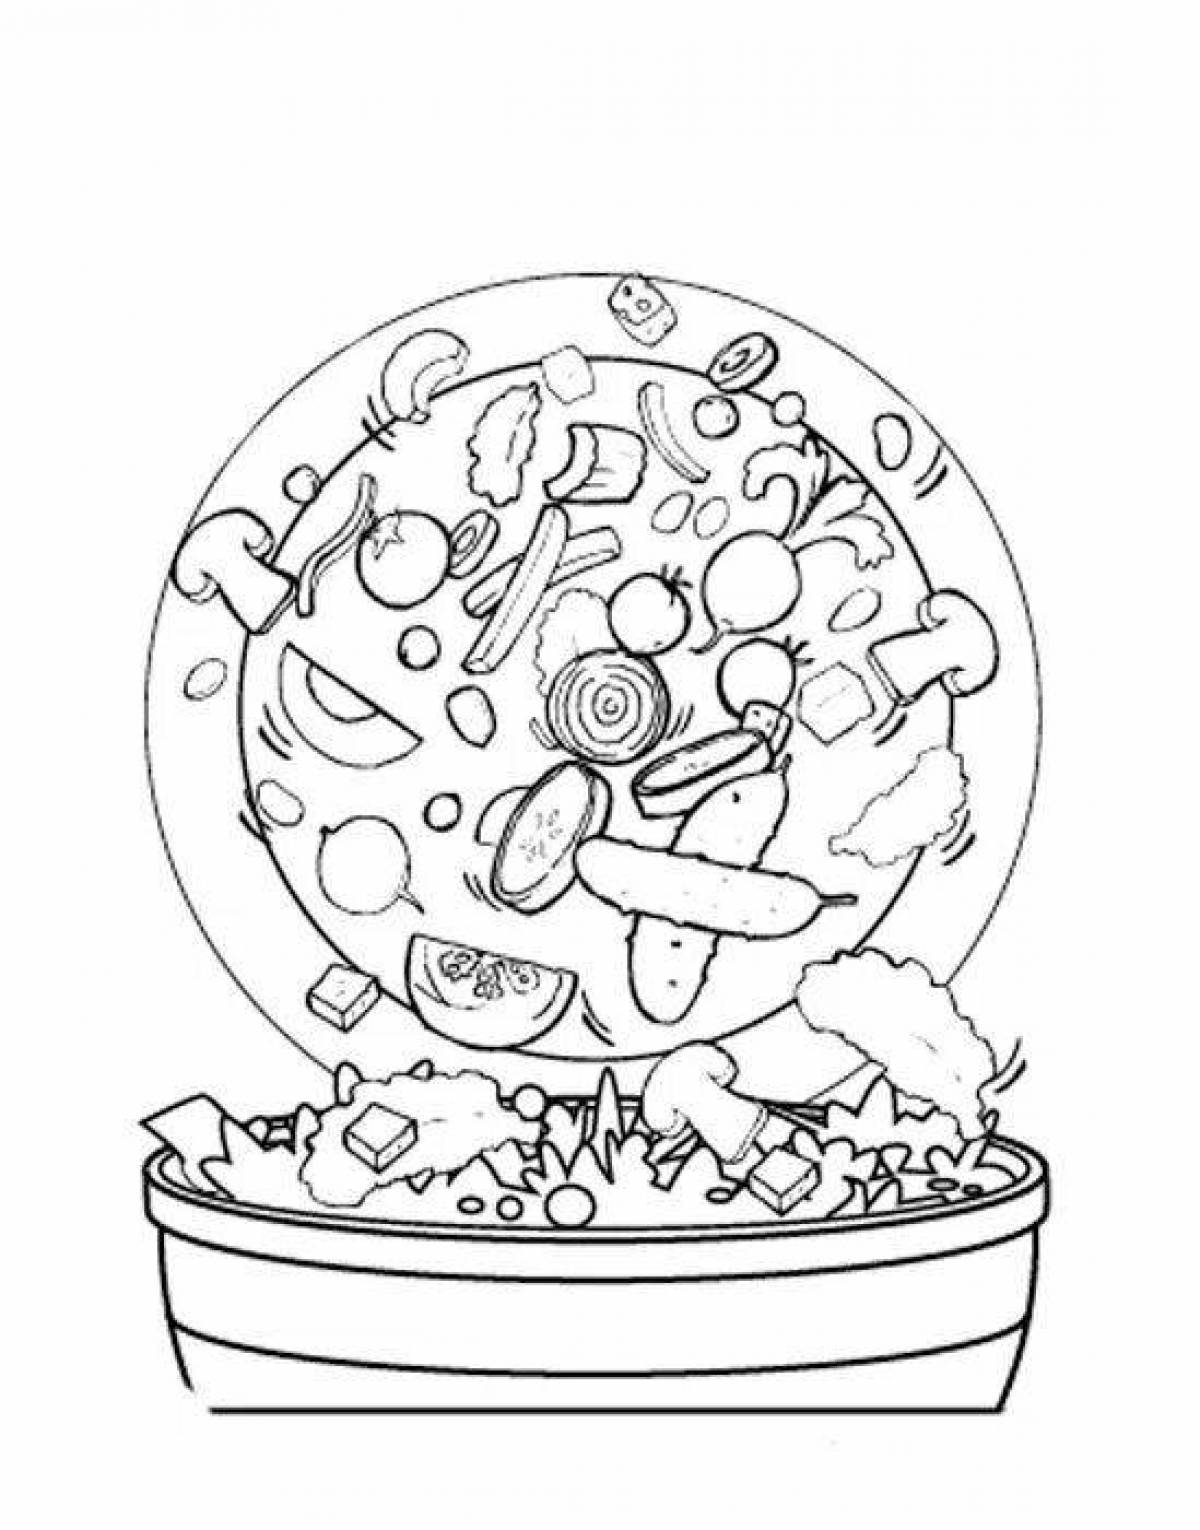 Colourful crab salad coloring page